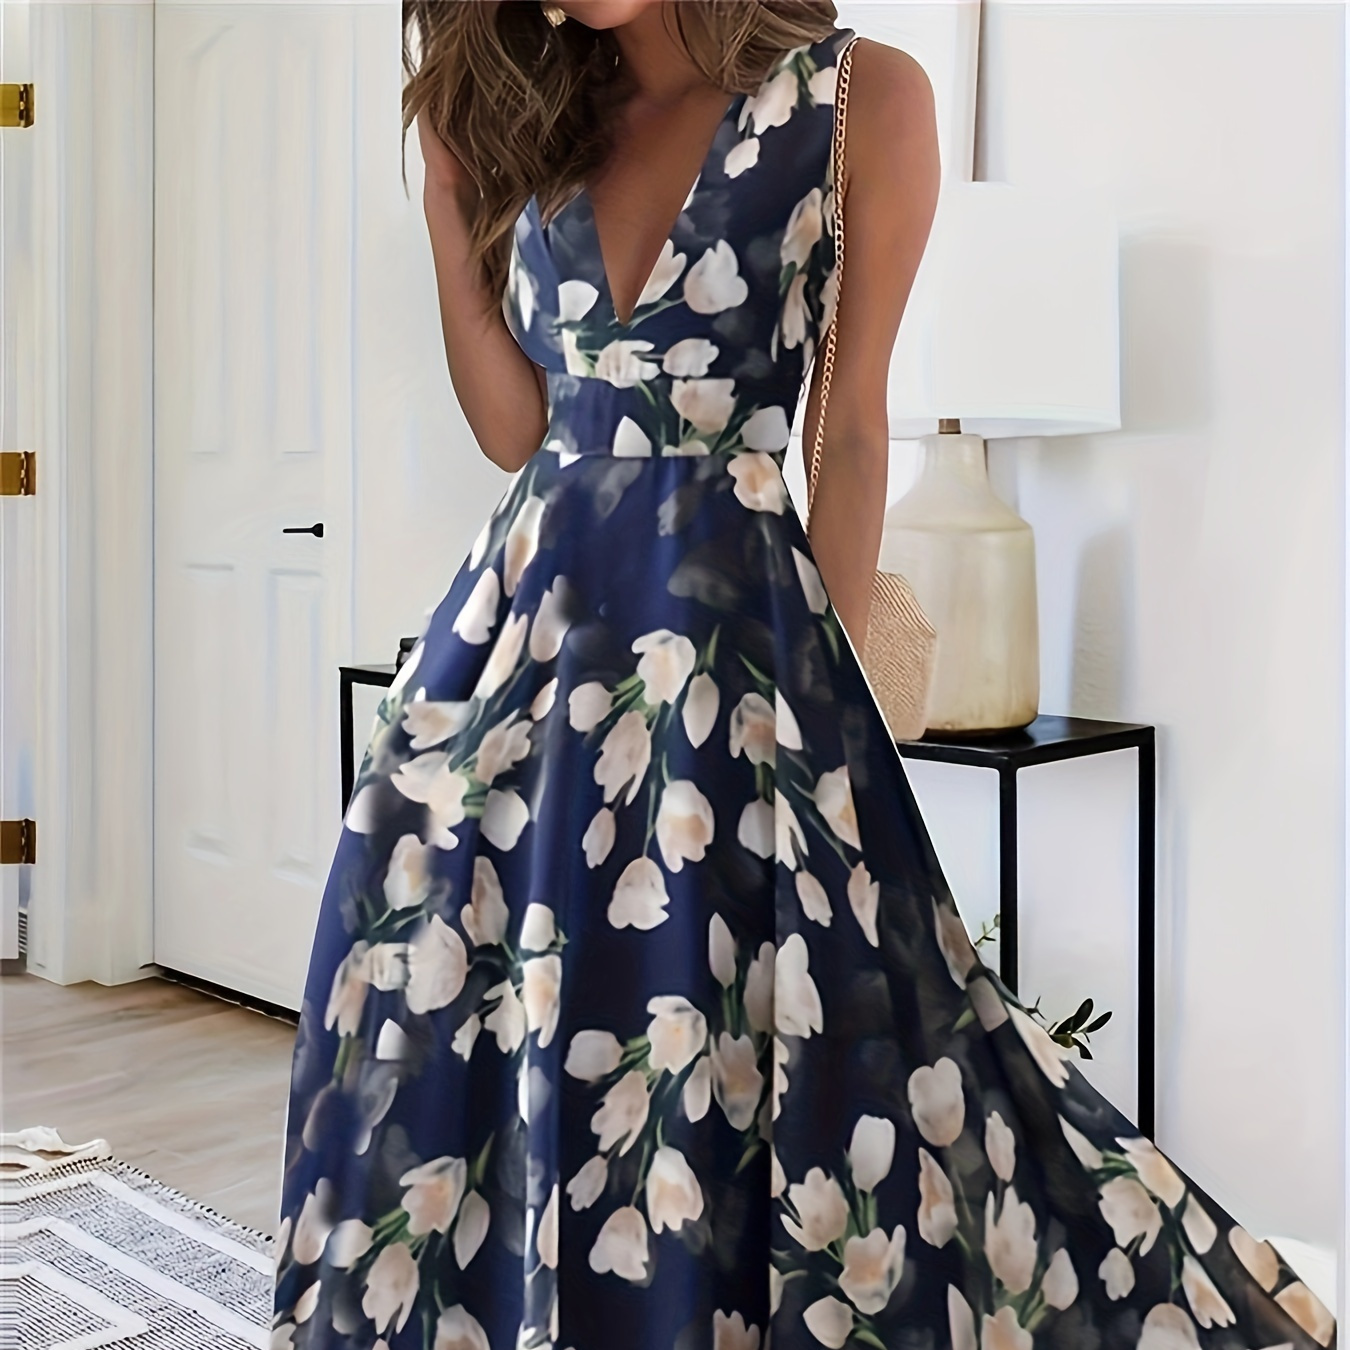 

Floral Print Cinched Waist Swing Dress, Vacation V Neck Sleeveless Dress For Spring & Summer, Women's Clothing